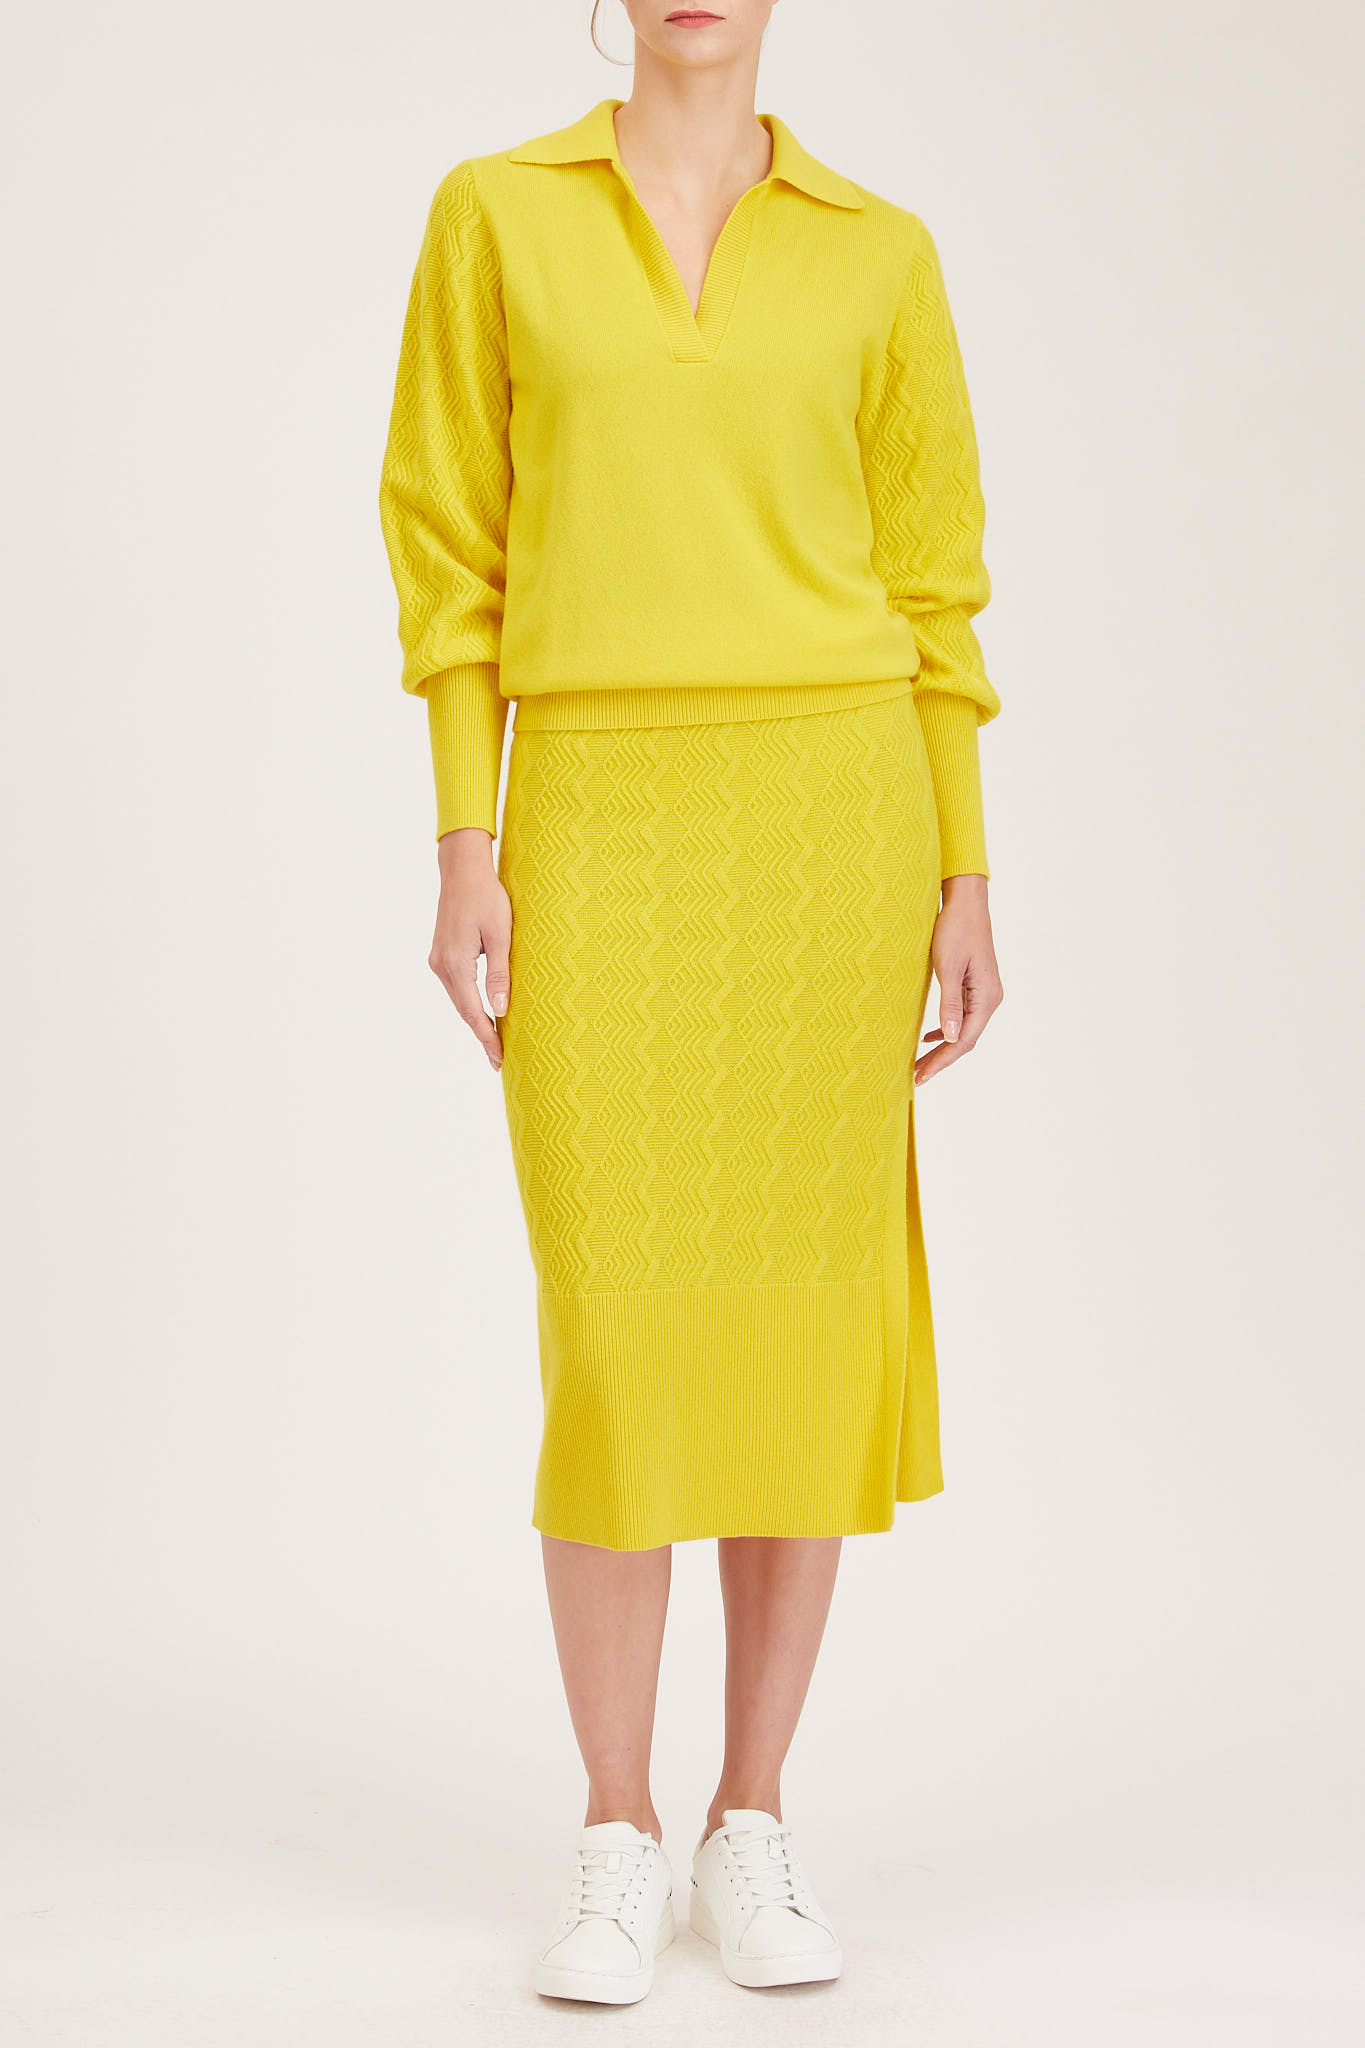 York Top – Open Polo neck loose fit knit sweater in yellow